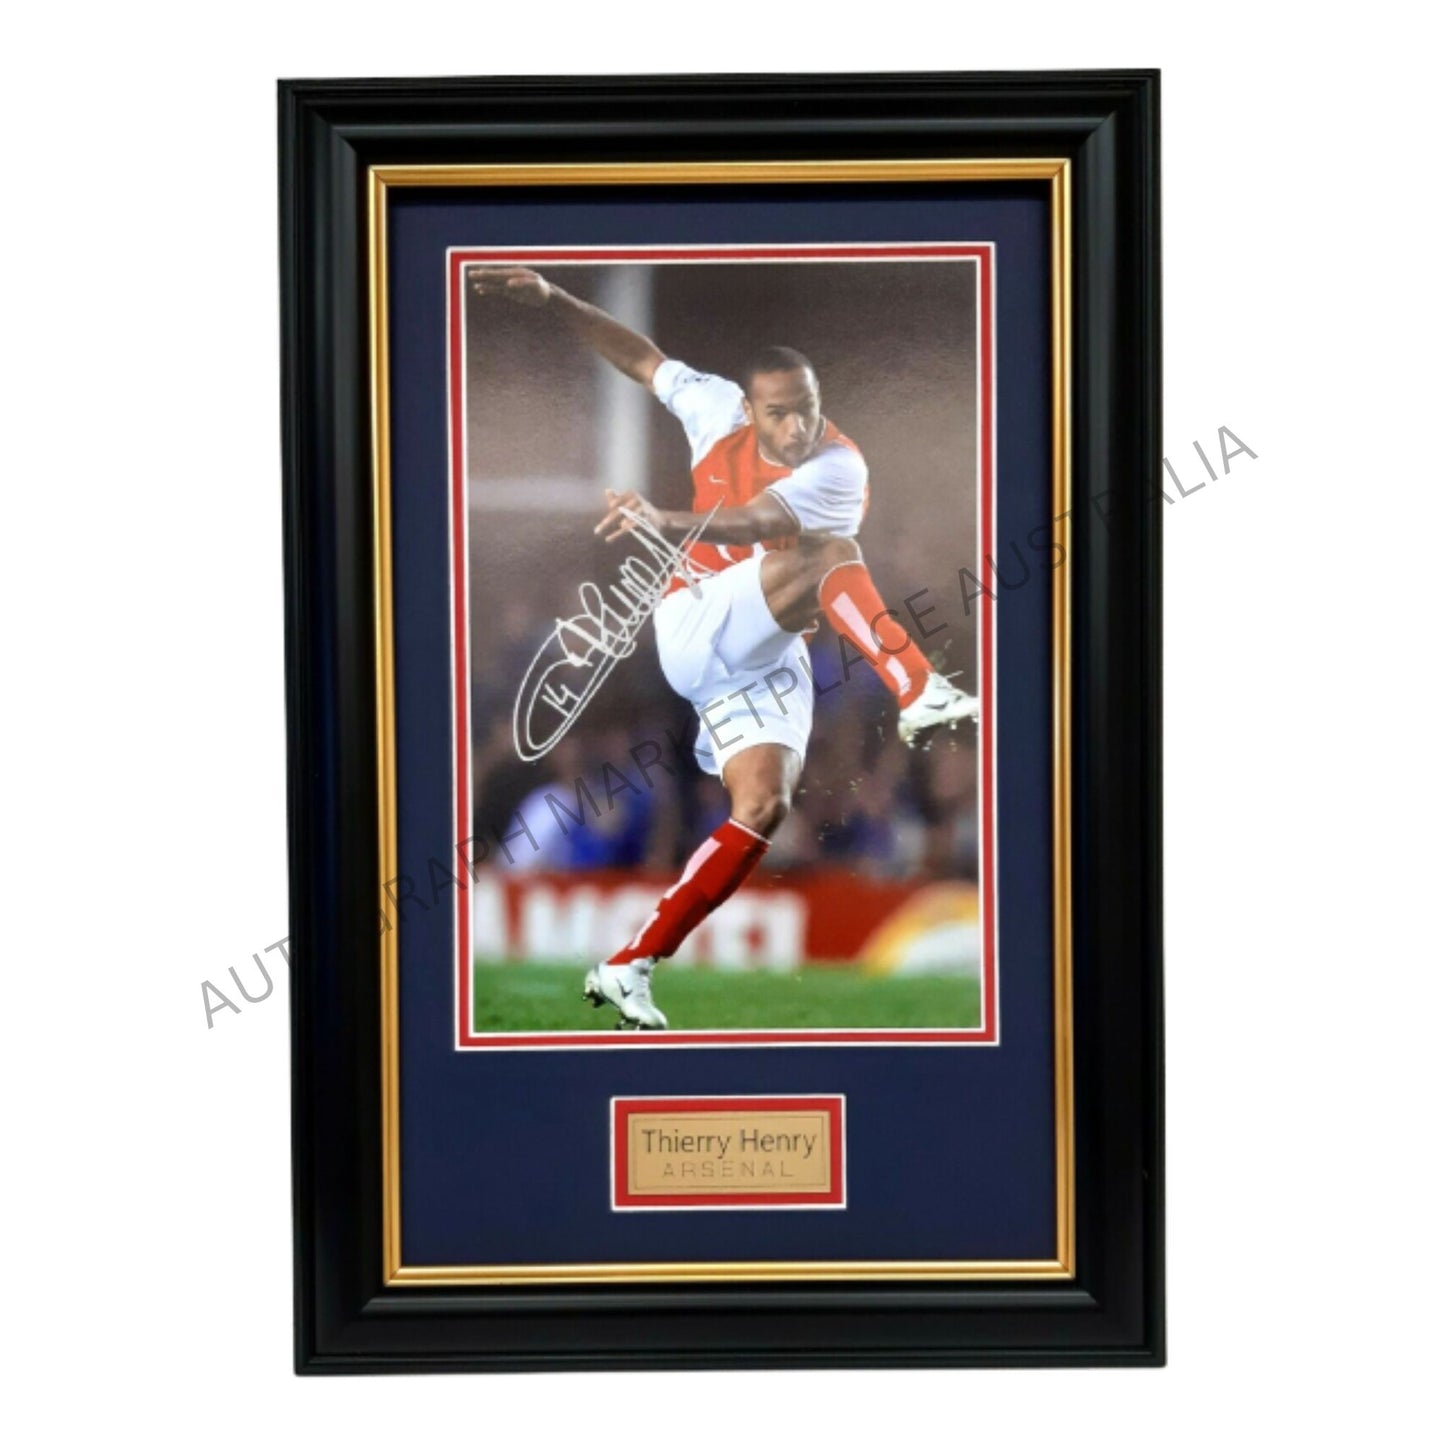 Thierry Henry Action Photo Signed Framed Arsenal Memorabilia Framed